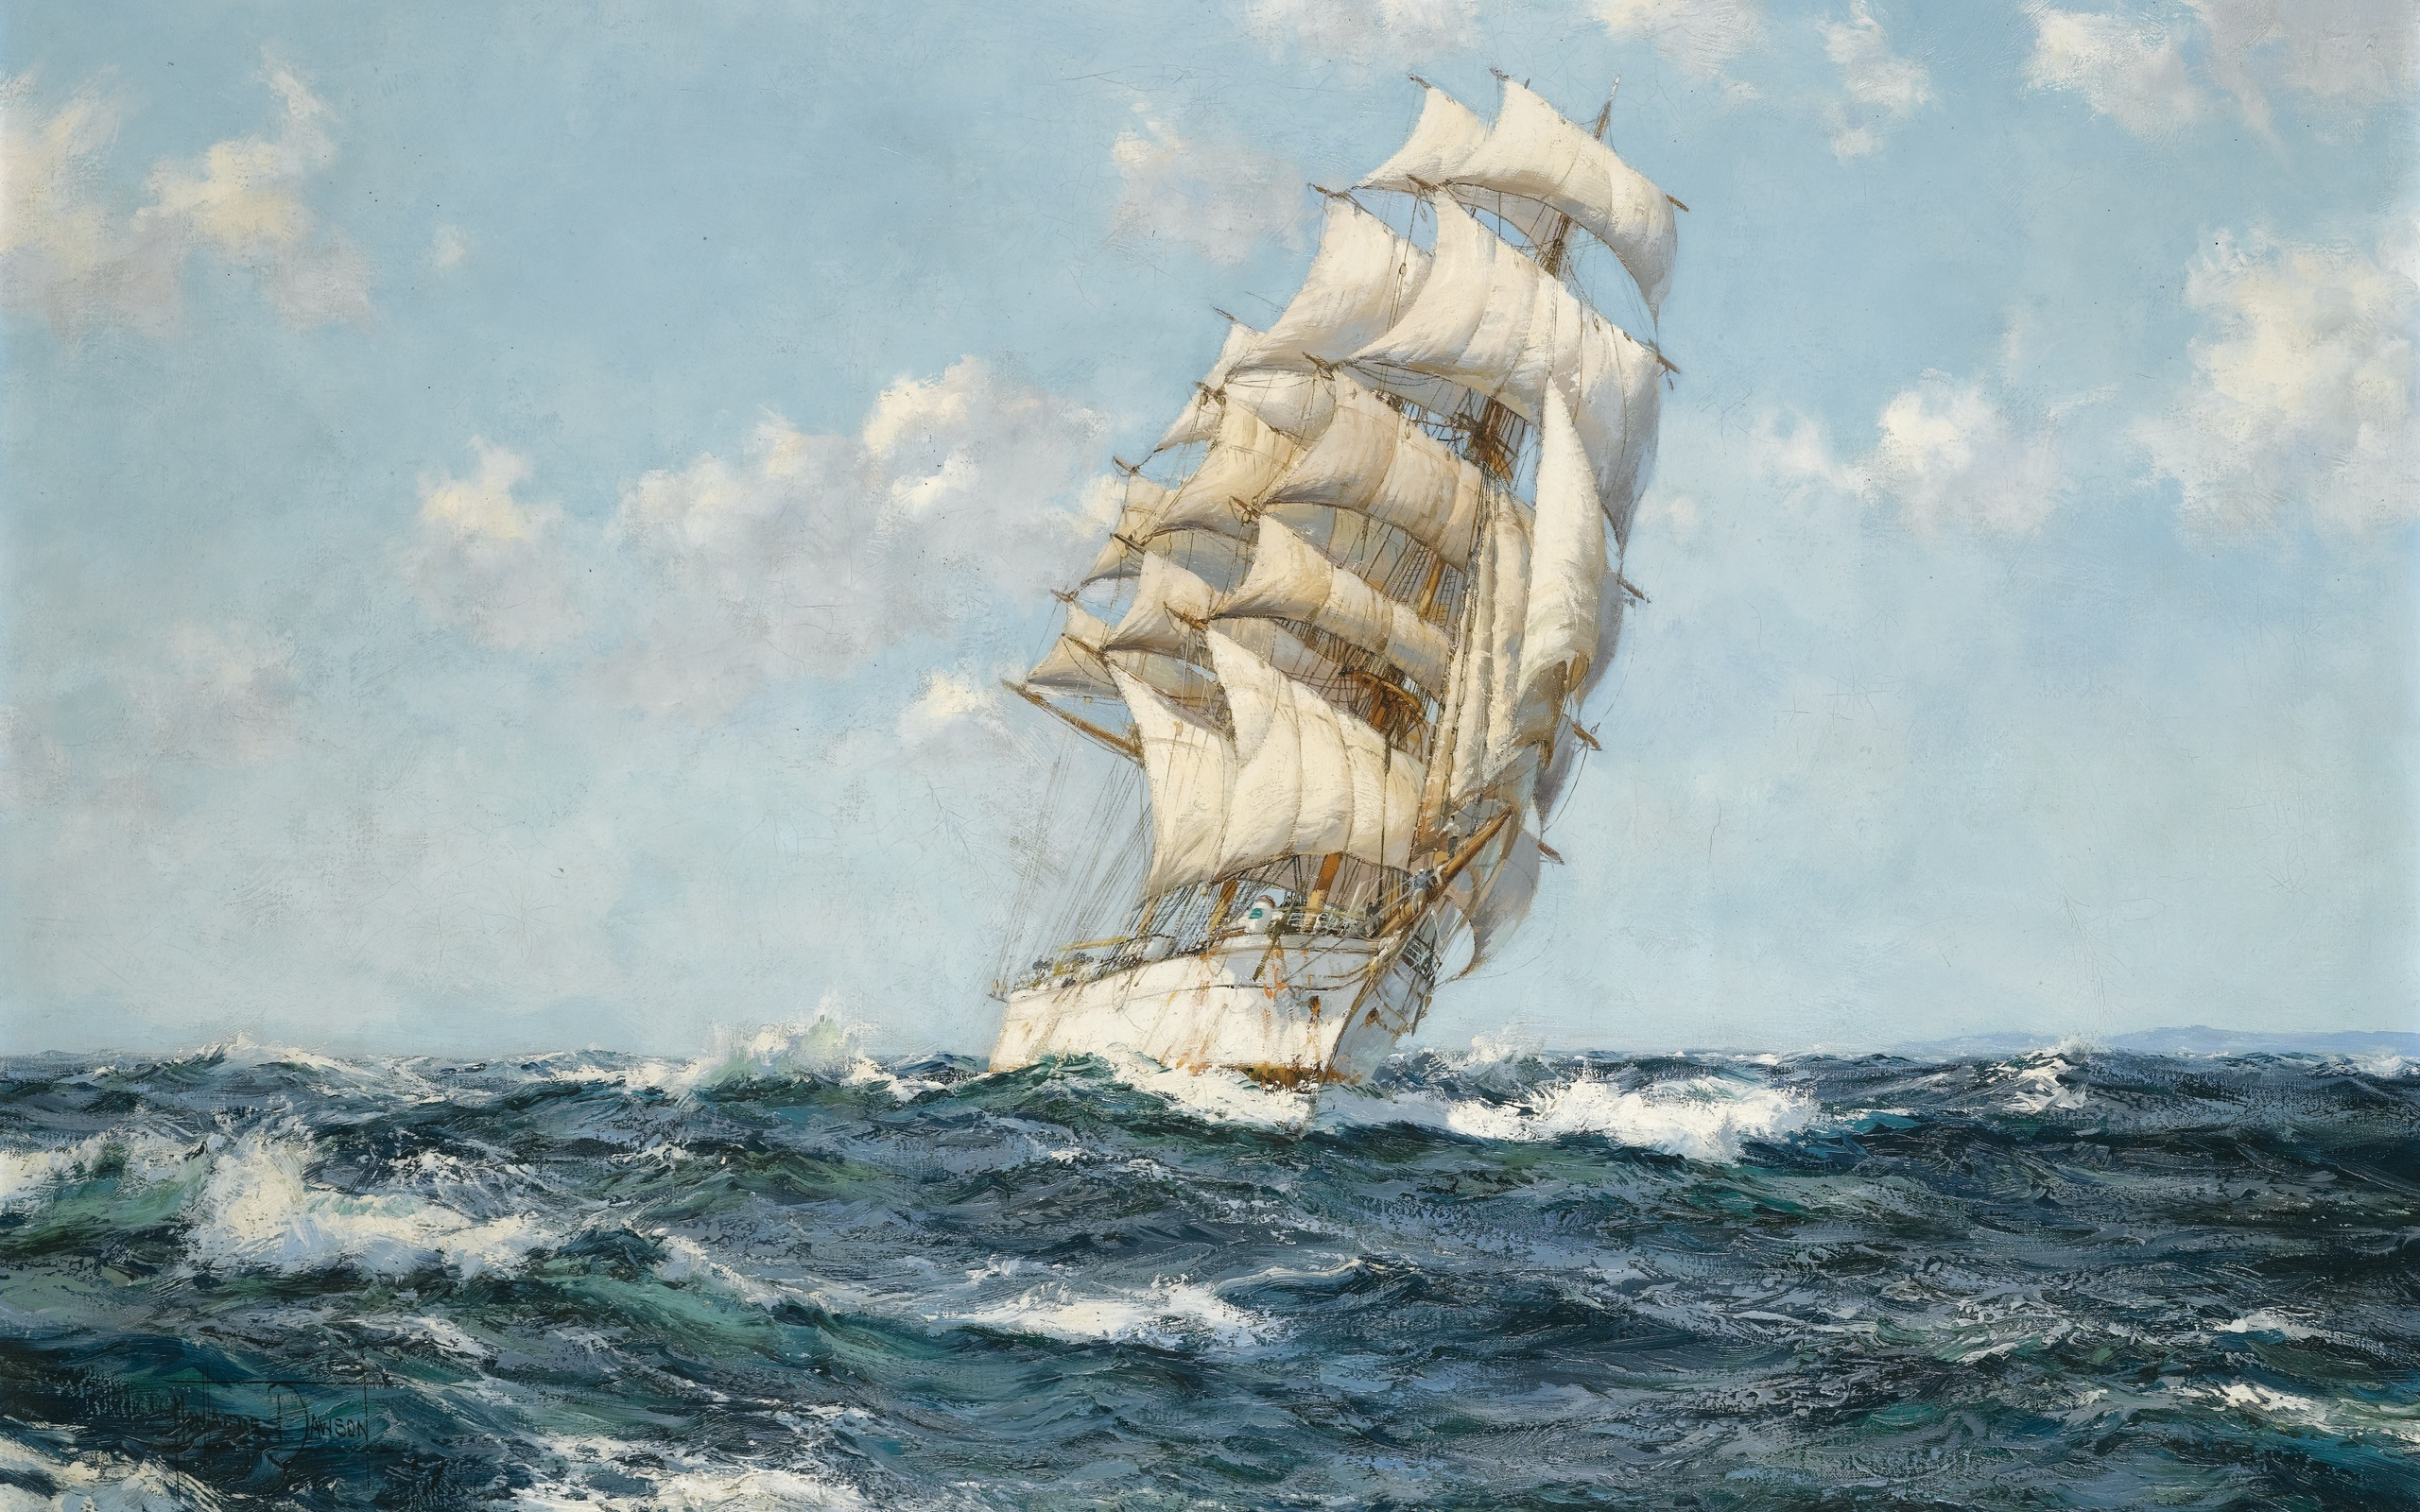 2560x1600 10+ Artistic Sailing Ship HD Wallpapers and Backgrounds